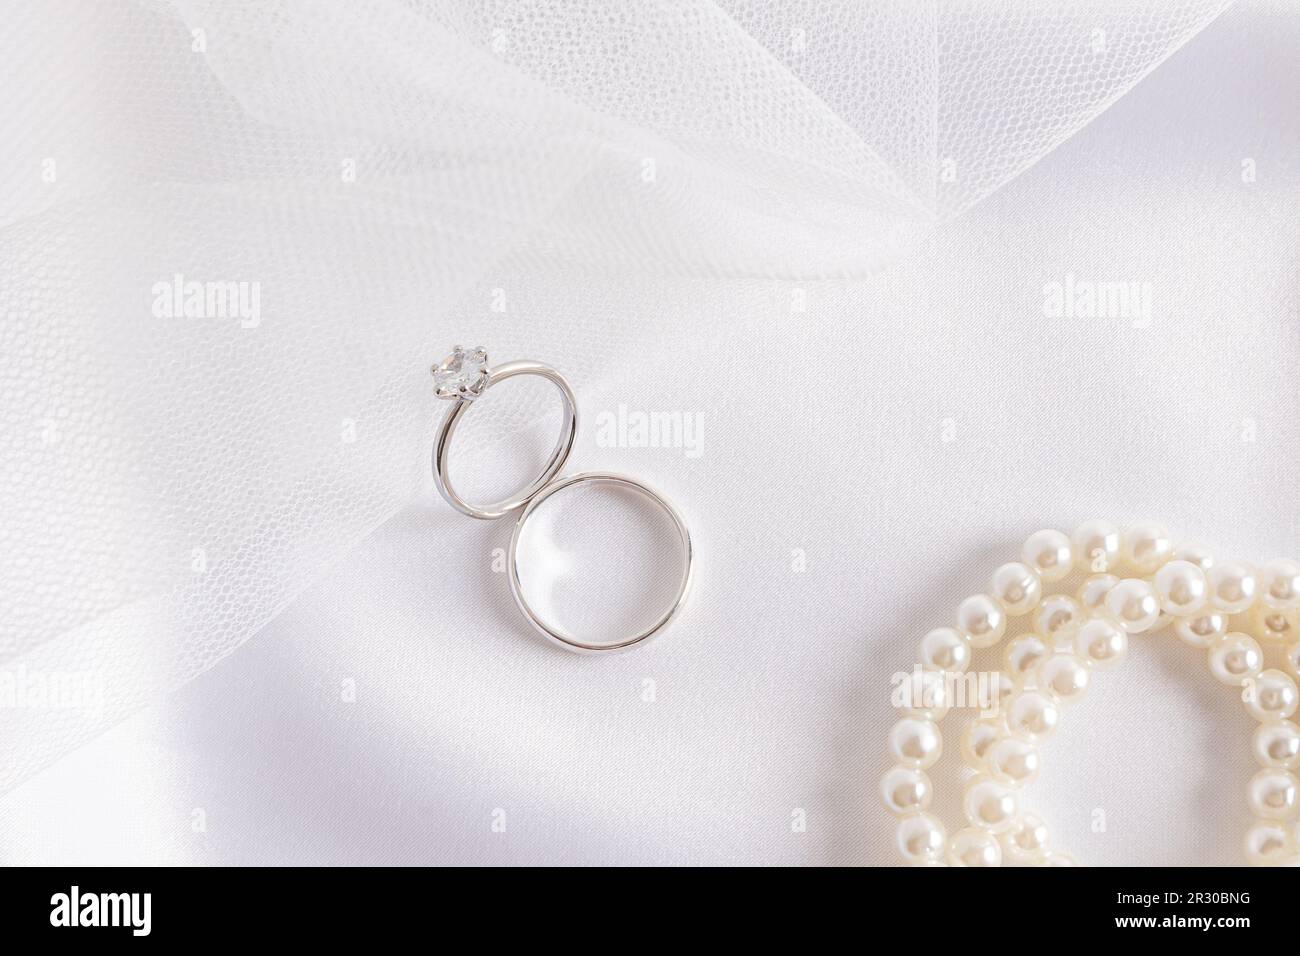 Two white gold rings with a diamond on the part of the bride's wedding veil and satin white textiles with pearl beads. Wedding composition Stock Photo